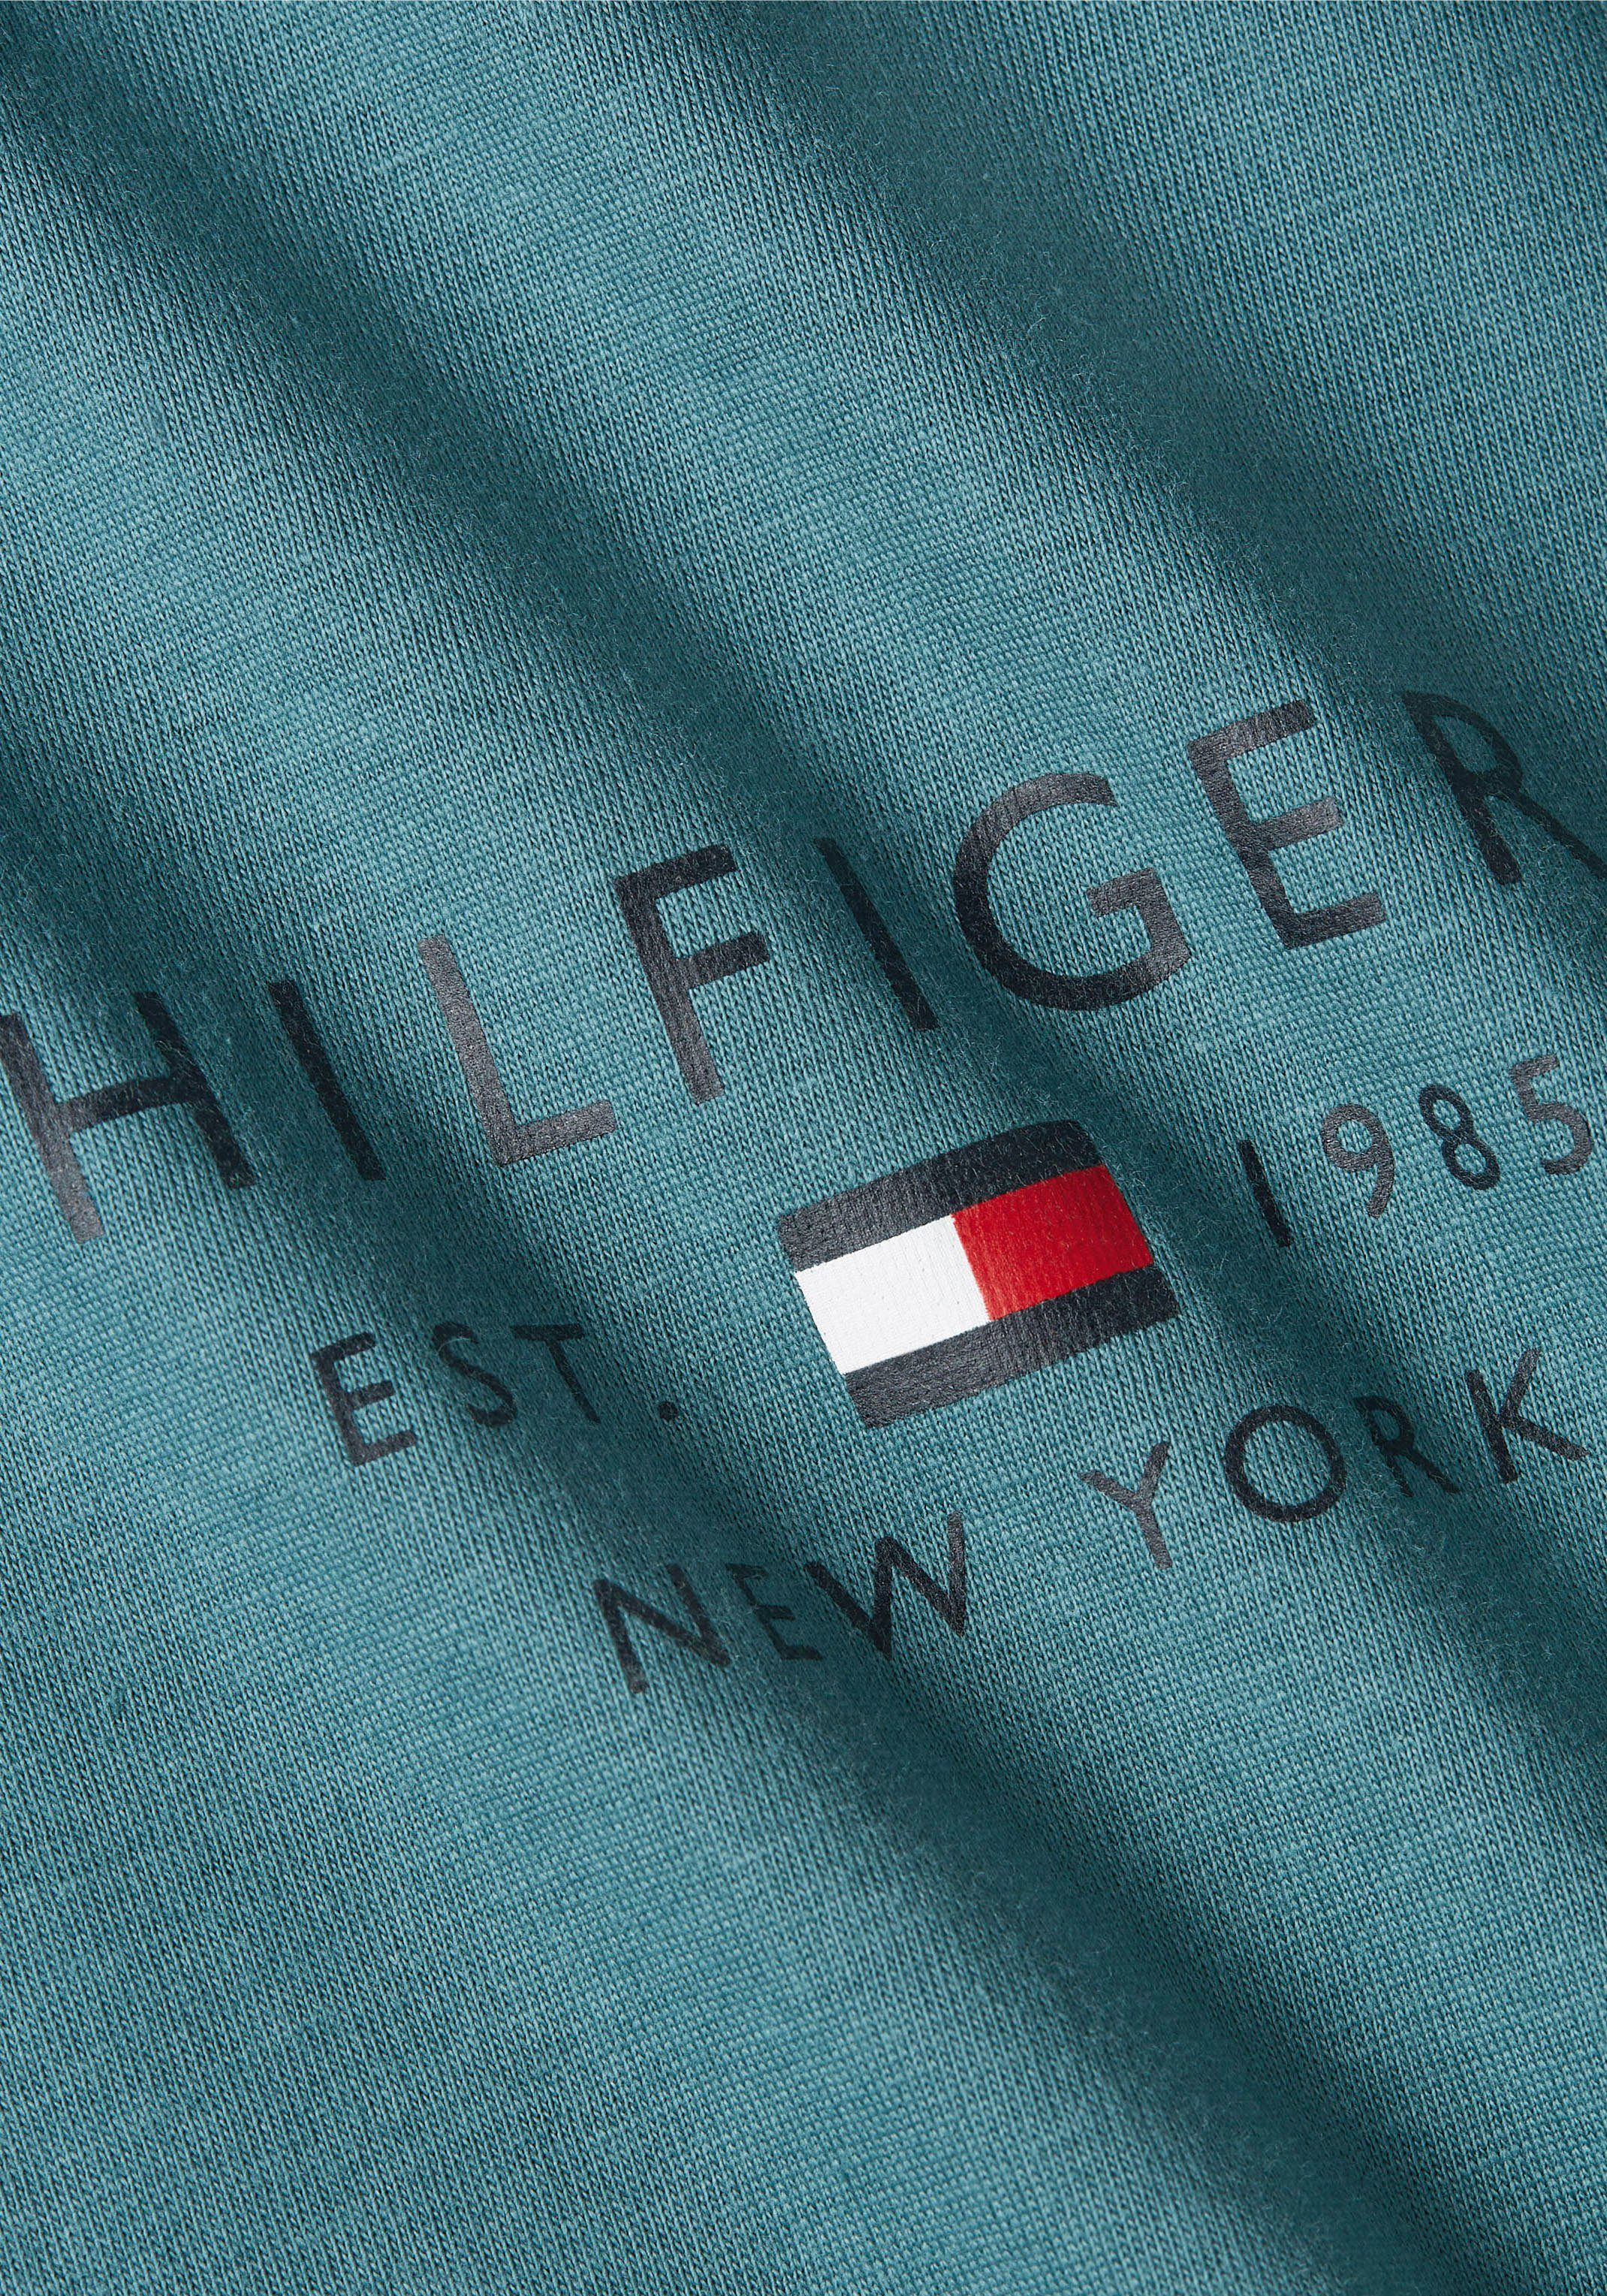 in LOGO Rundhalsshirt Basicform LOVE SMALL Green BRAND Frosted TEE Hilfiger Tommy